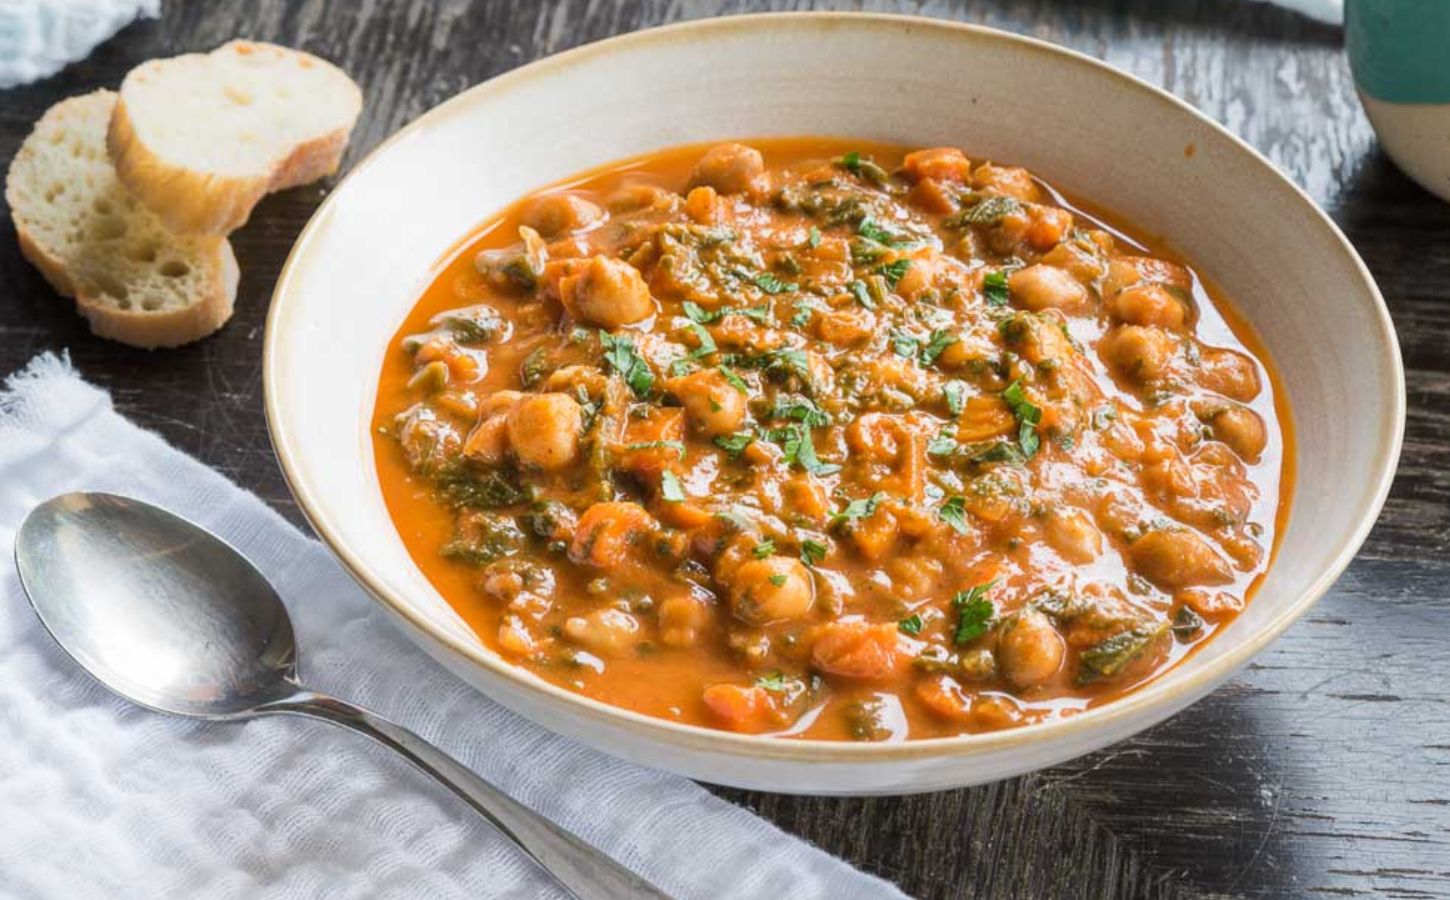 A vegan Spanish chickpea and spinach stew